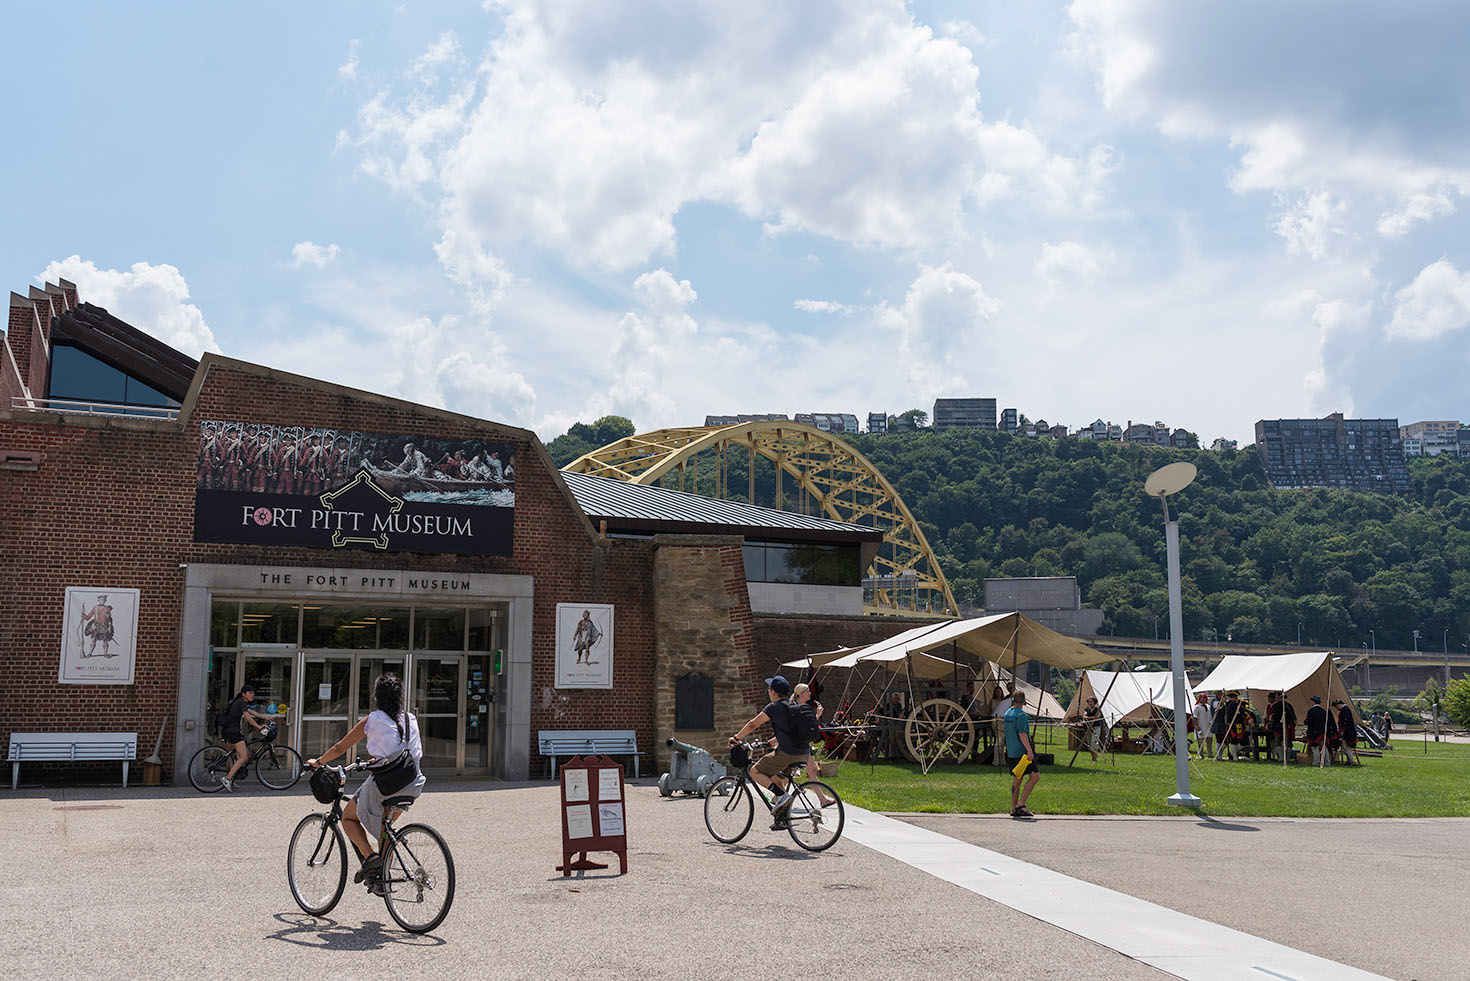 Exterior image of the Fort Pitt Museum